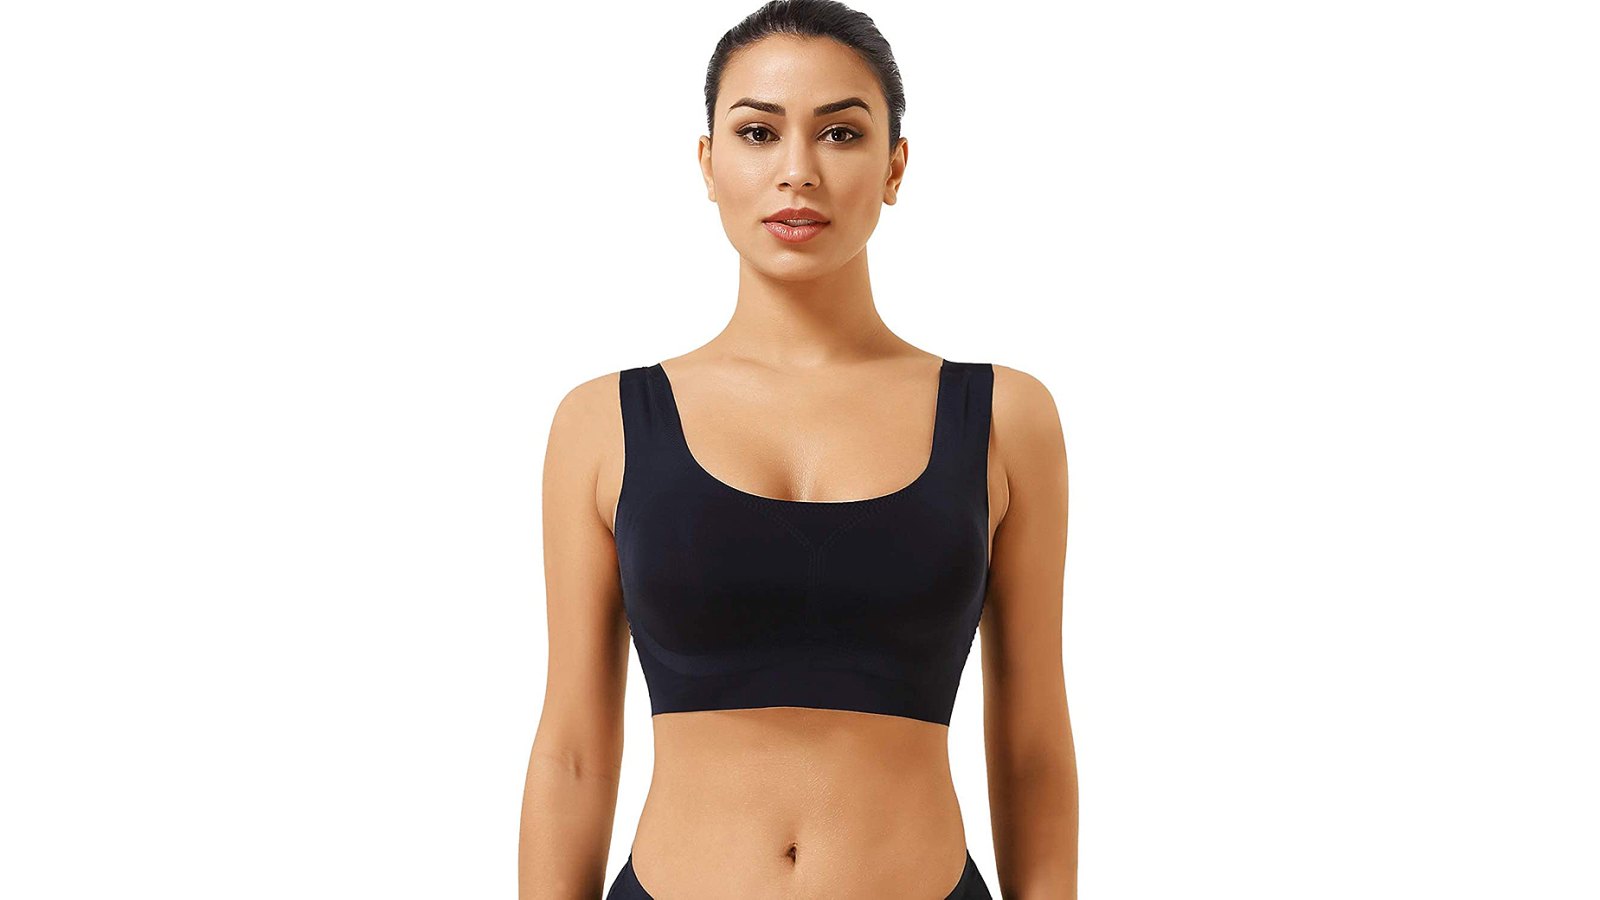 Ittcbro Seamless Bra Looks Invisible and Feels Weightless